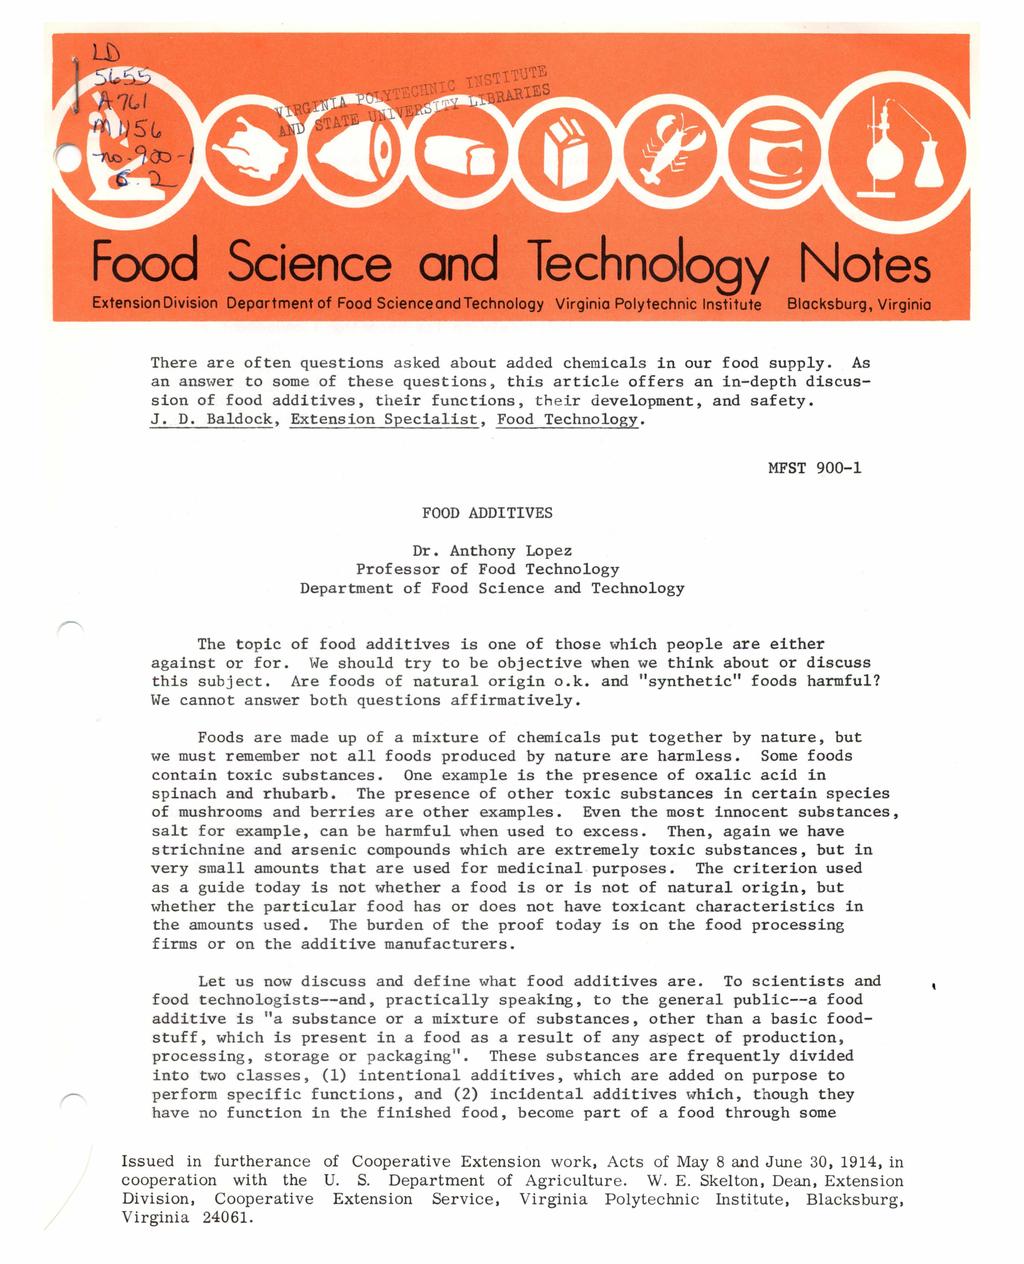 Food Science and Technology Notes Extension Division Deportment of Food ScienceondTechnology Virginia Polytechnic Institute Blacksburg, Virginia There are often questions asked about added chemicals